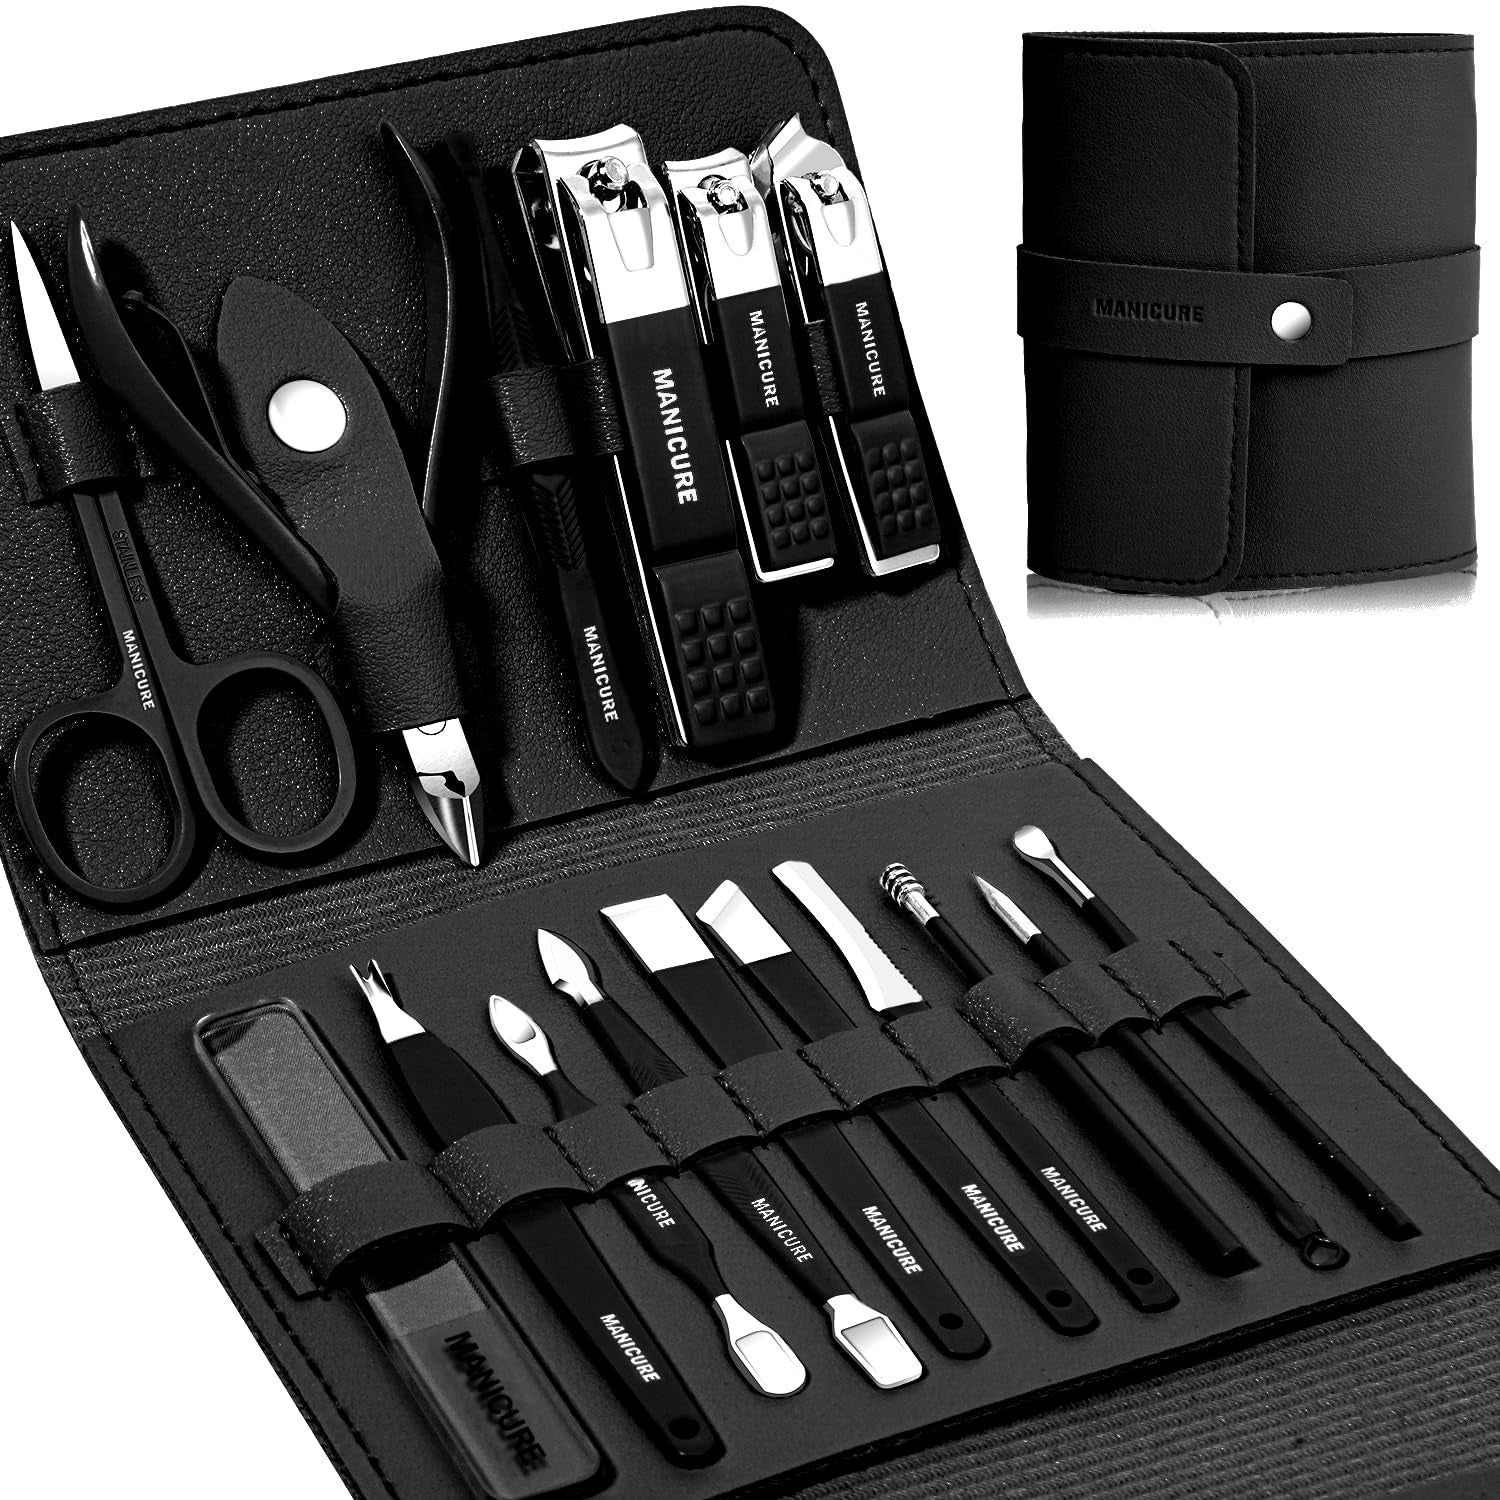 Manicure Set Professional Nail Clippers Pedicure Kit, 16 Pcs Stainless Steel Nail Care Tools Grooming Kit with Luxurious Travel Leather Case for Thick Nails Men Women Gift (Black)